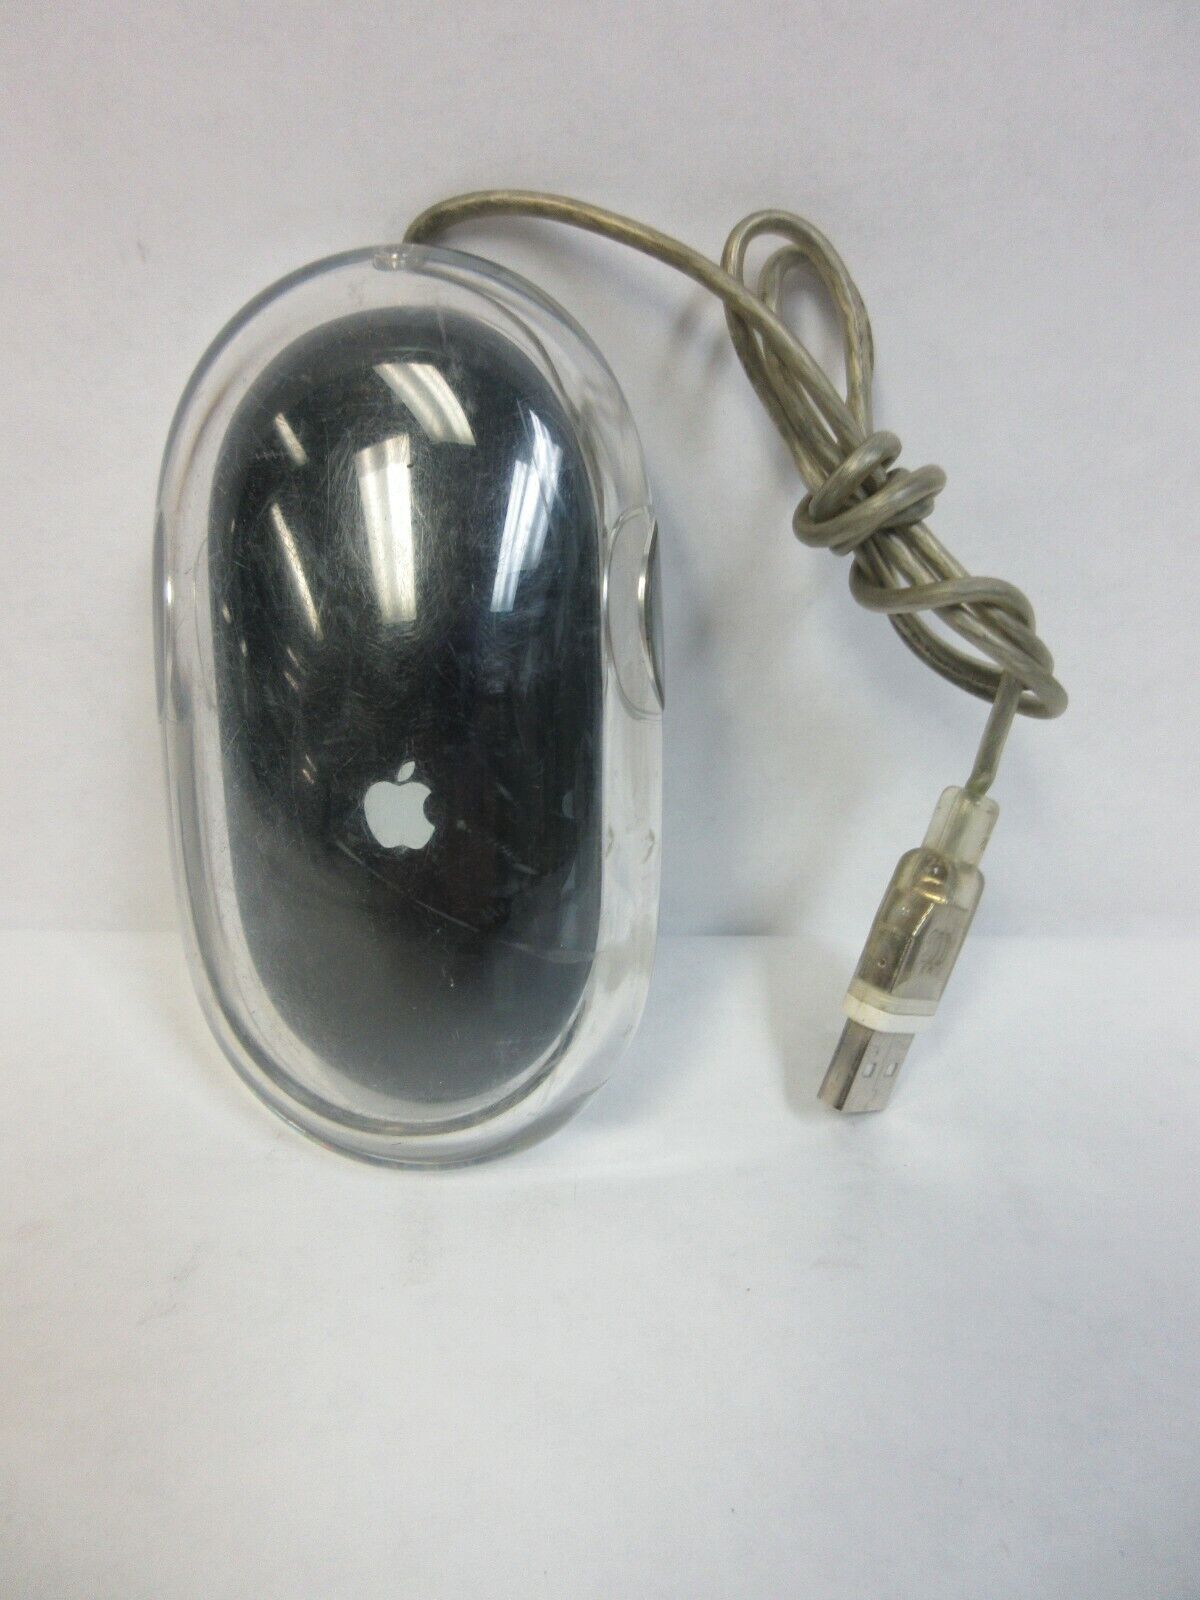  Vintage Genuine Apple M5769 Wired Optical USB Mouse Black/Clear